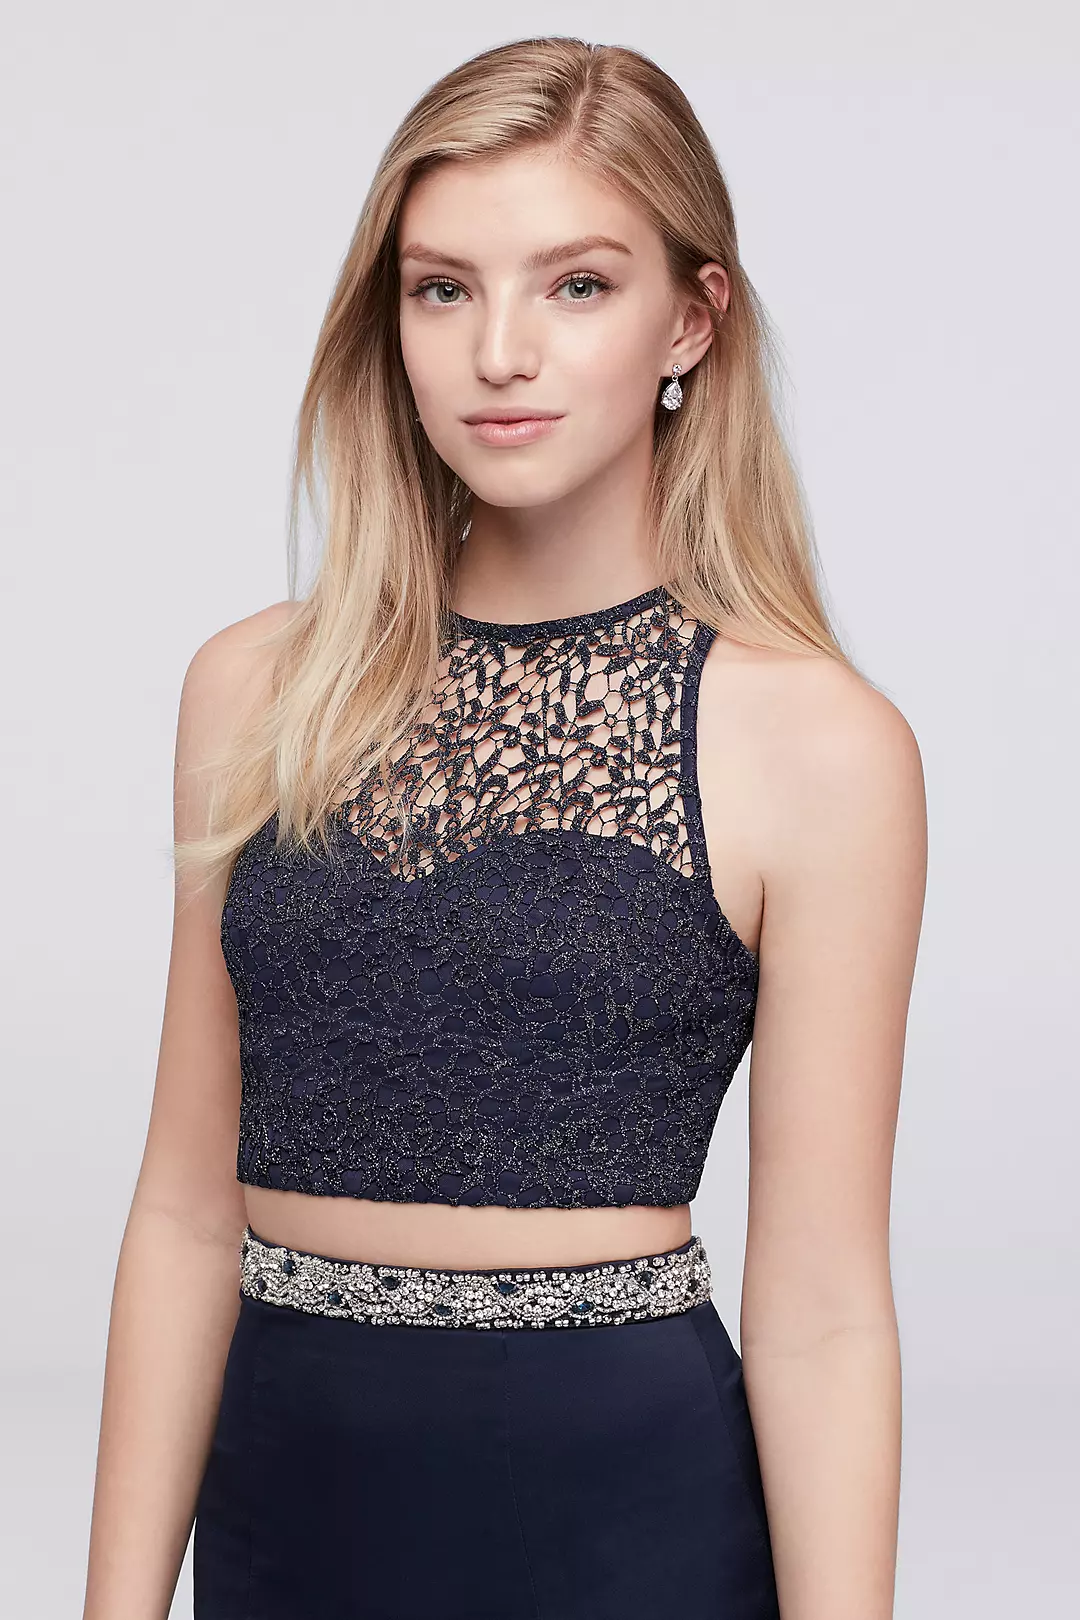 Lace Top and Ruffled Mermaid Skirt Two-Piece Dress Image 3